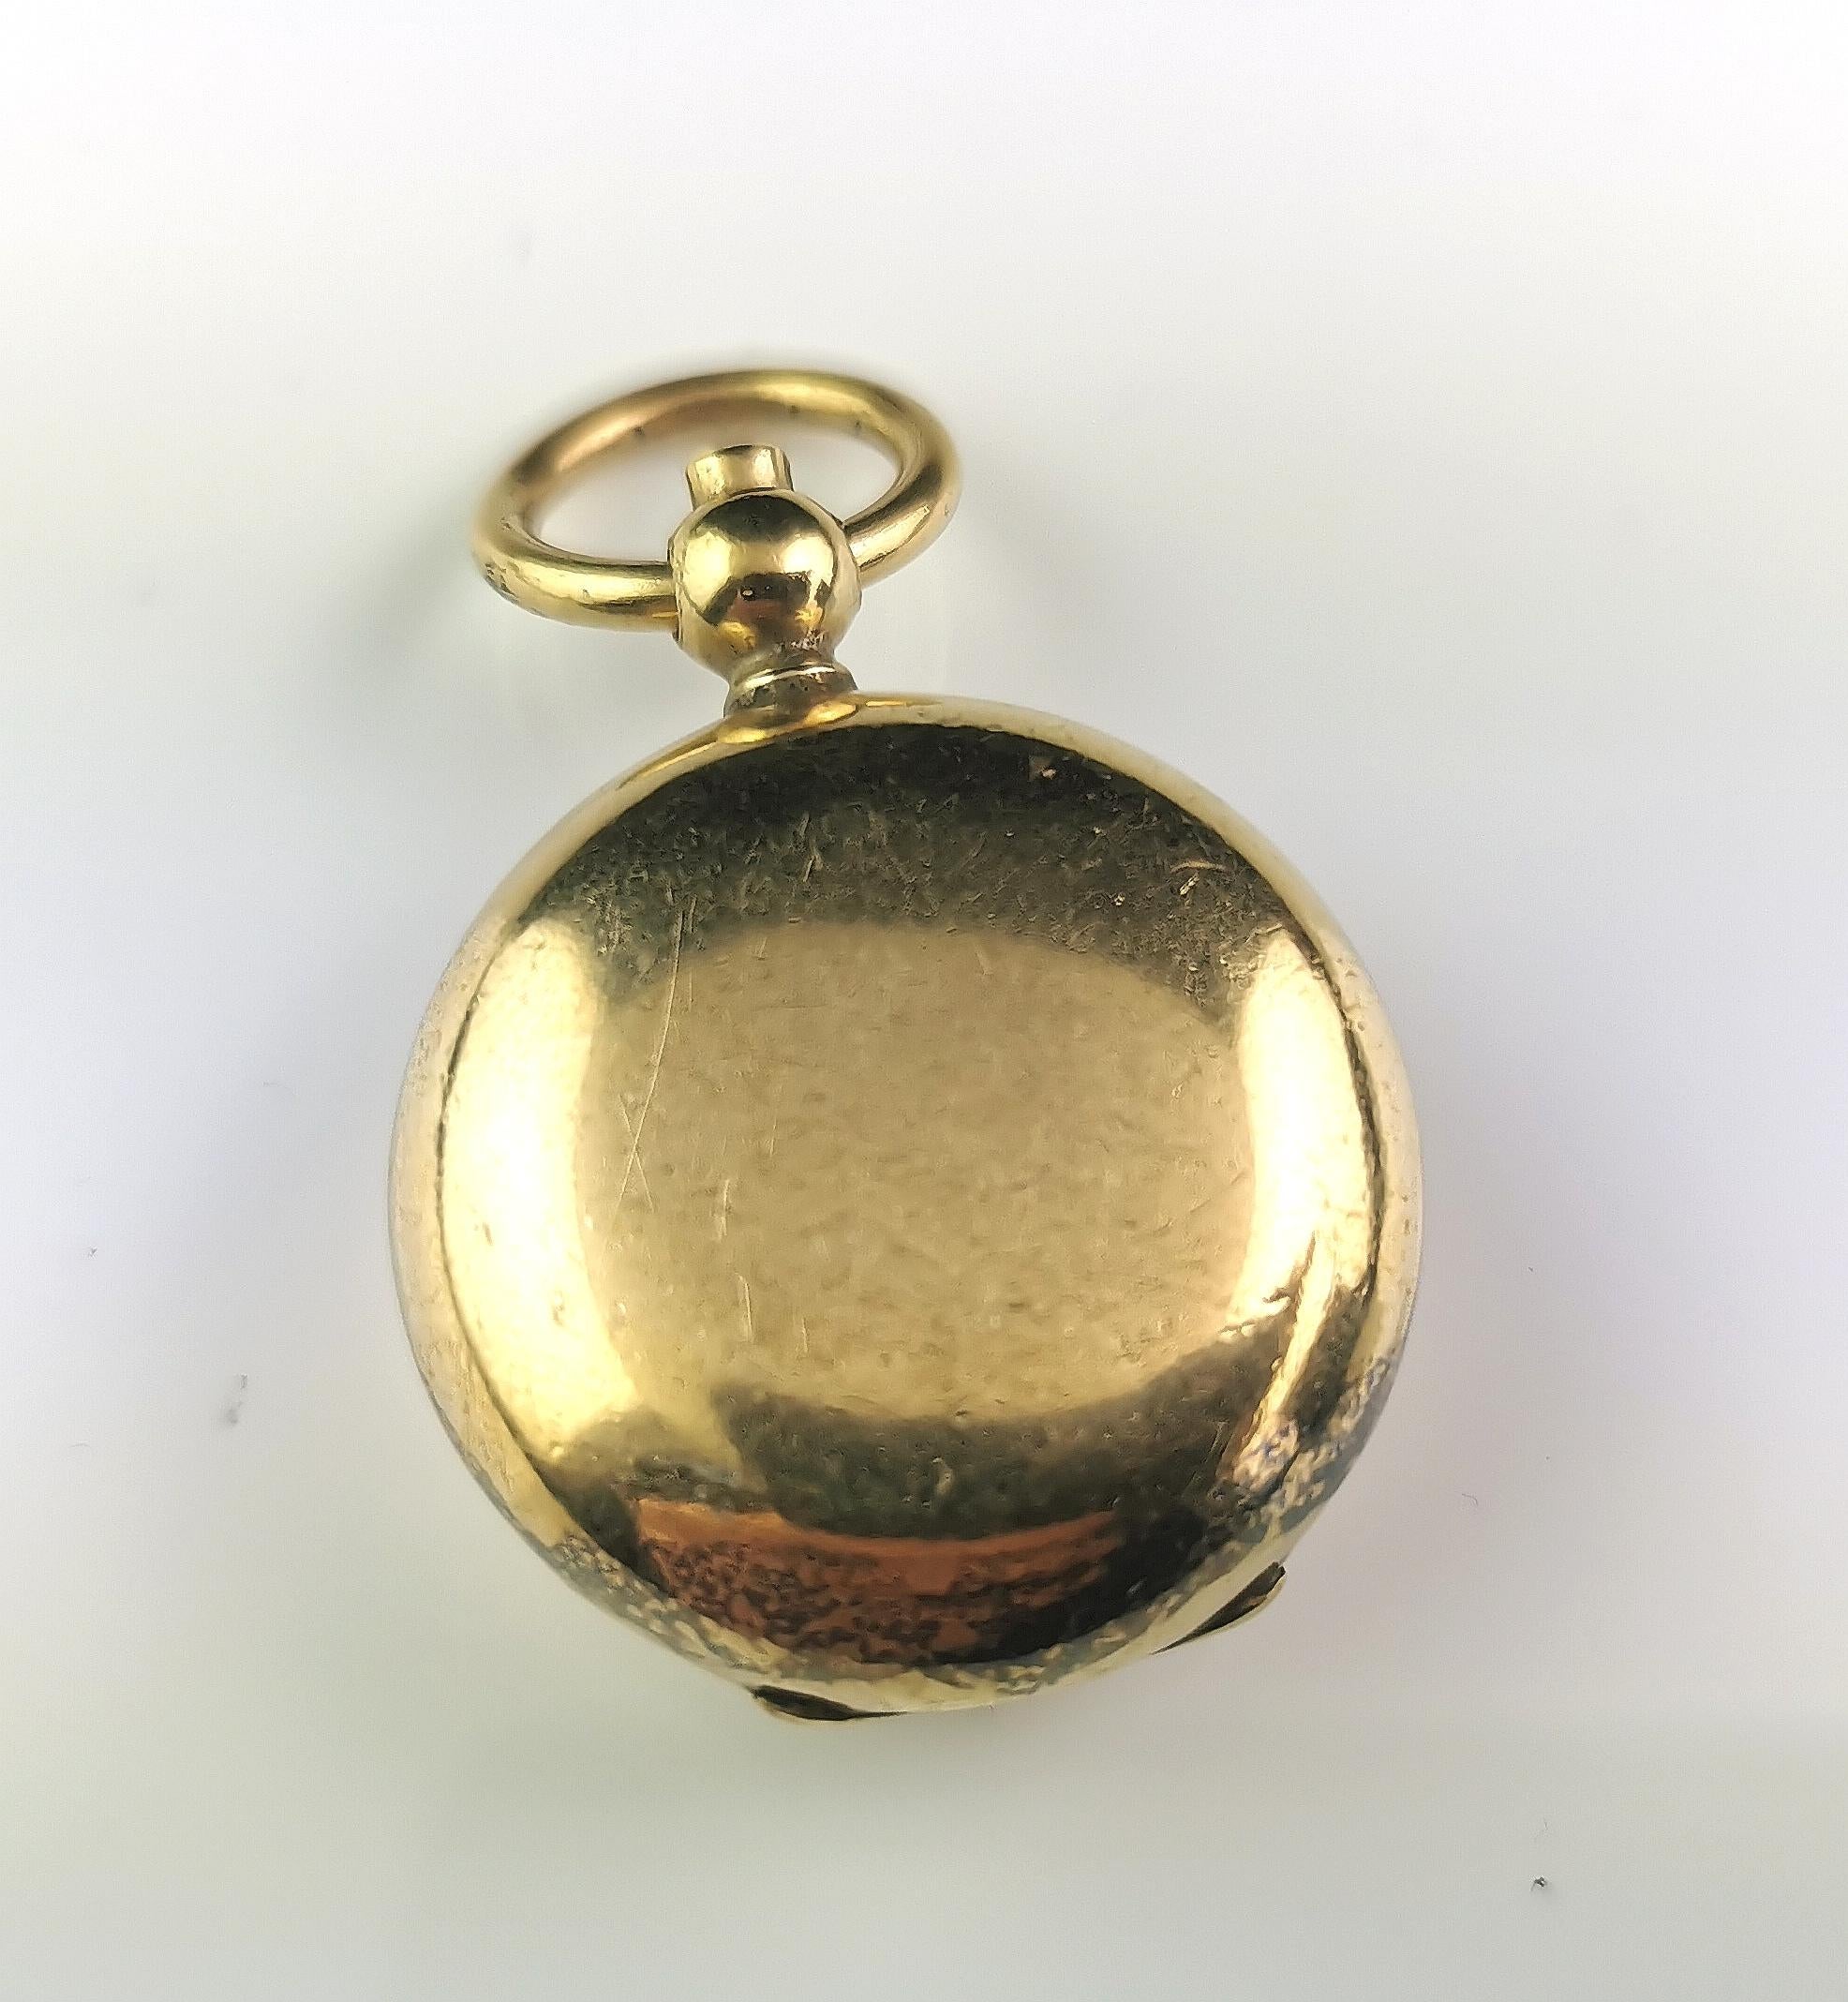 A handsome antique Edwardian era gold plated sovereign case.

This is a circular case with a single holder, made from gold plated metal it has a bow loop, ready to hang from your favourite long chain or Albert chain.

The sovereign holder was